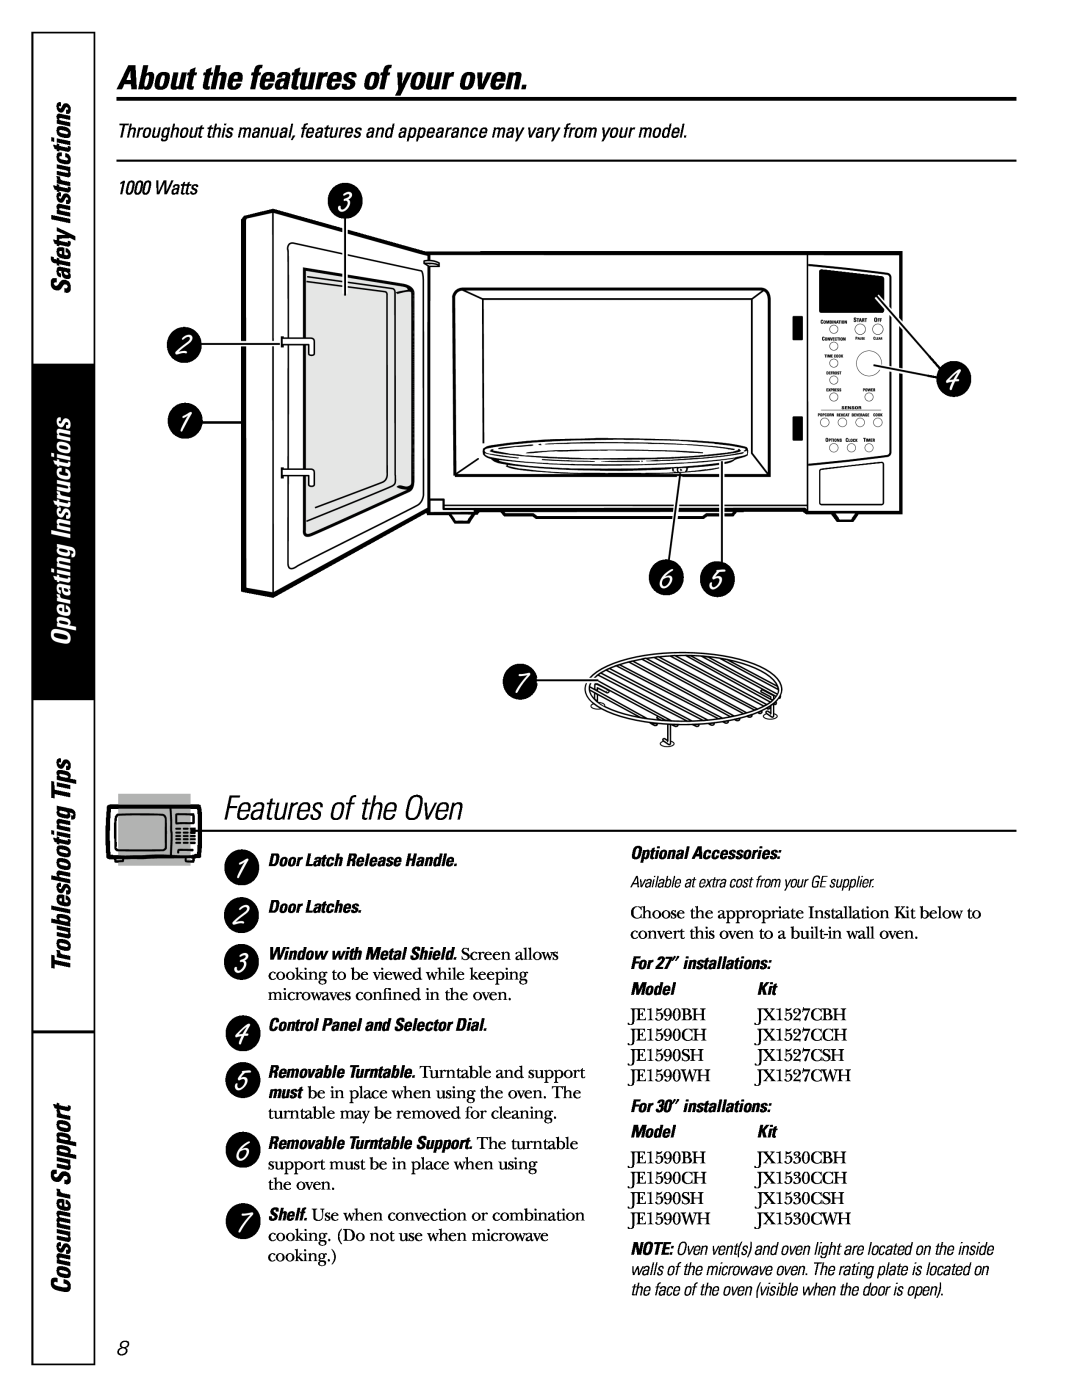 GE JE1590 About the features of your oven, Features of the Oven, Safety Instructions, Operating Instructions, Door Latches 